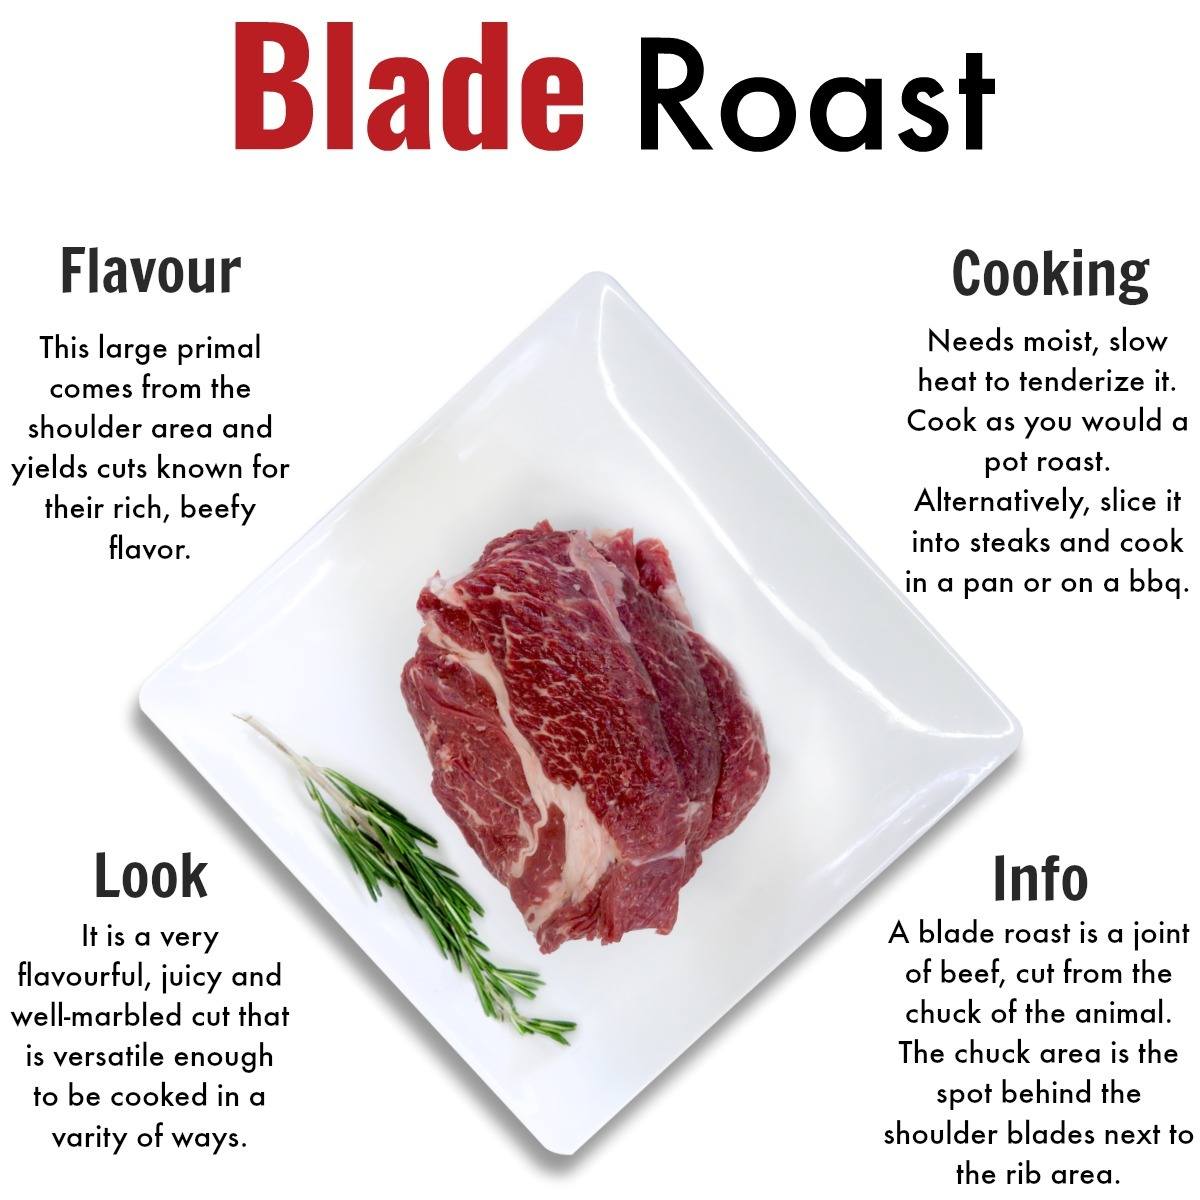 Affordable grass-fed beef delivery near me, steaks, ground beef and more - Nutrafams - Blade Roast 2